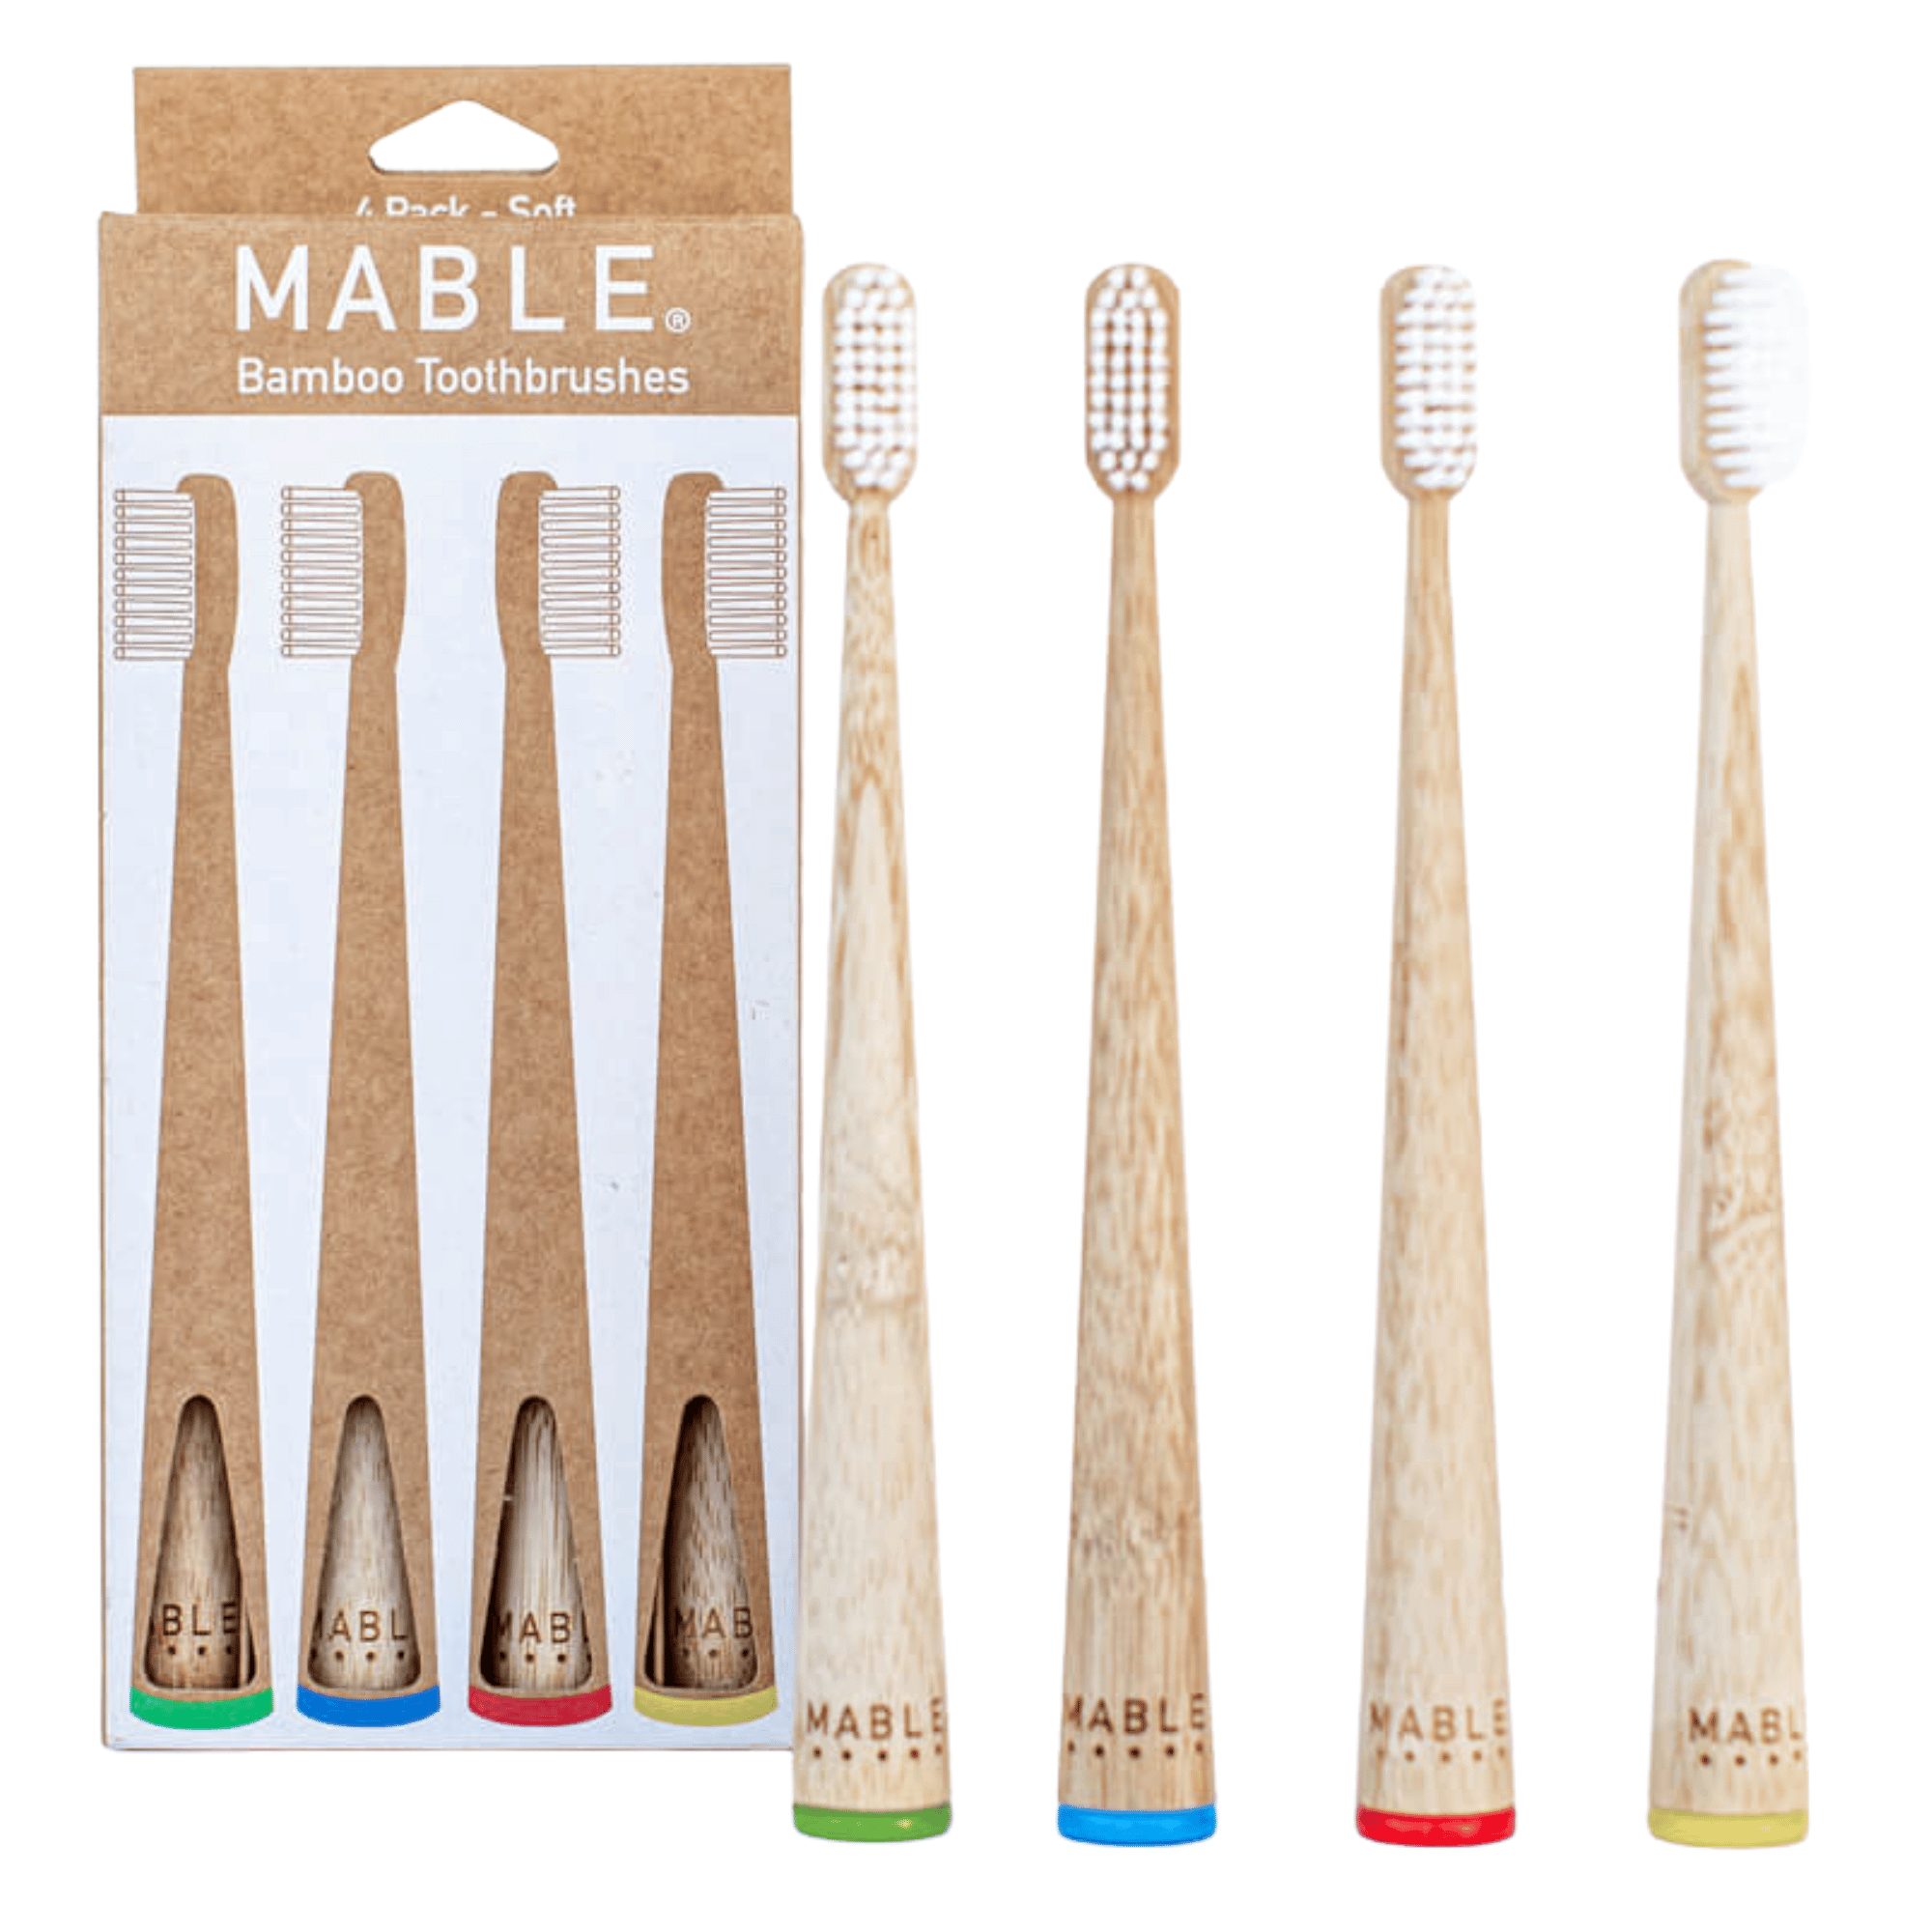 MABLE® Four Pack bamboo toothbrushes: Contain four of our ergonomic, self-standing bamboo toothbrushes. Four packs available in adult and kids size: Get a pack of bamboo toothbrushes for Kids: they're naturally anti-bacterial and water resistant. The handles are 100% compostable and certified by the USDA as 100% biobased. Made from sustainably harvested bamboo certified by the FSC.